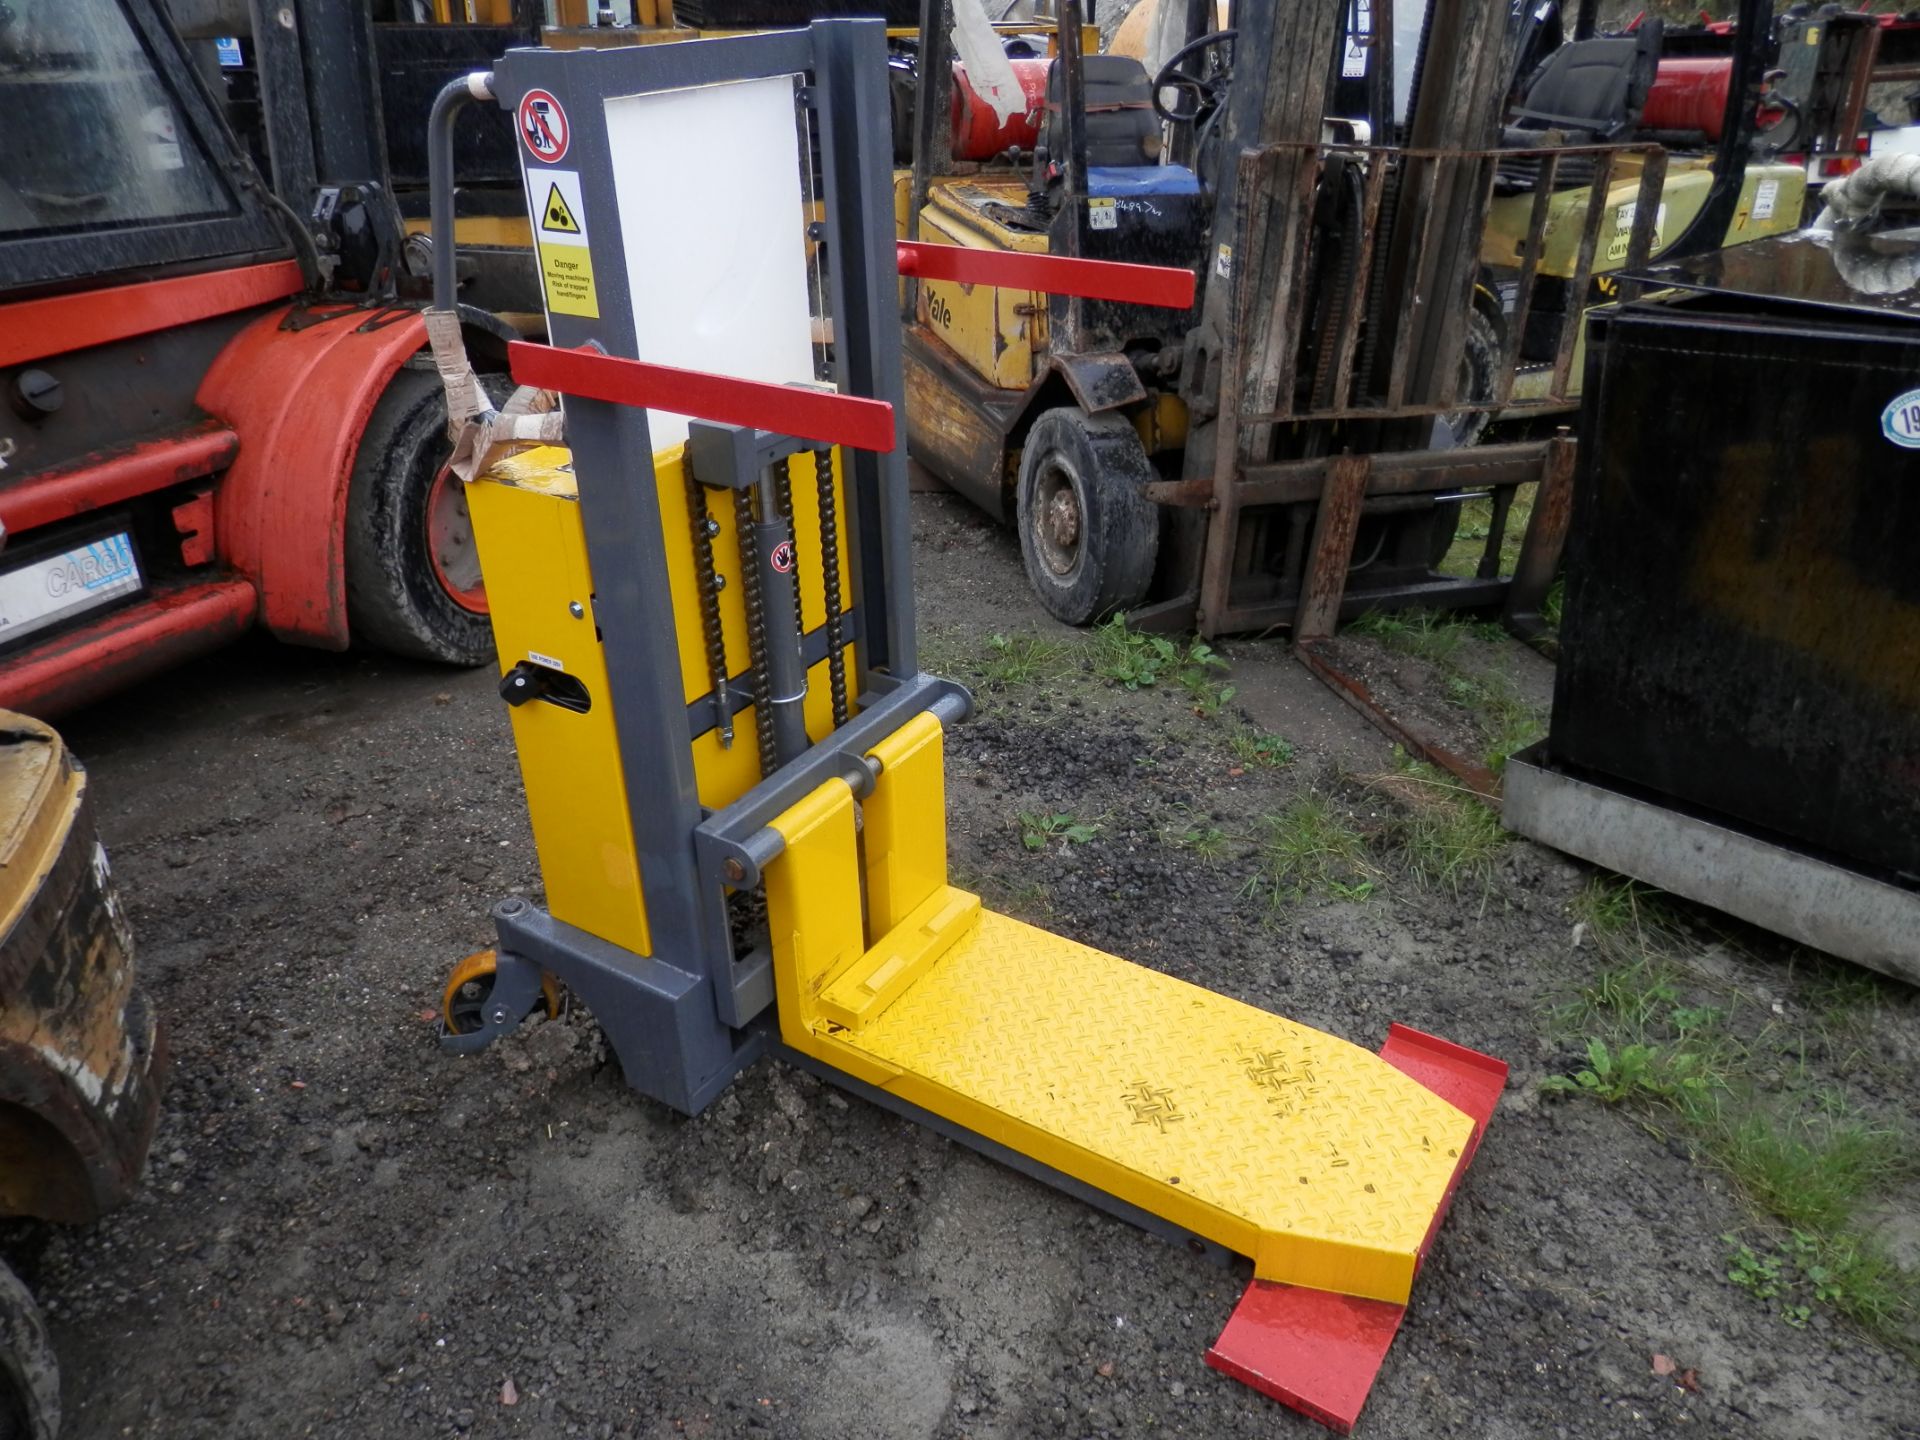 NEW WARRIOR 12V ELECTRIC PALLET TRUCK, 5 AVAILABLE. 250KG LIFT CAPACITY, 1000MM. - Image 2 of 5